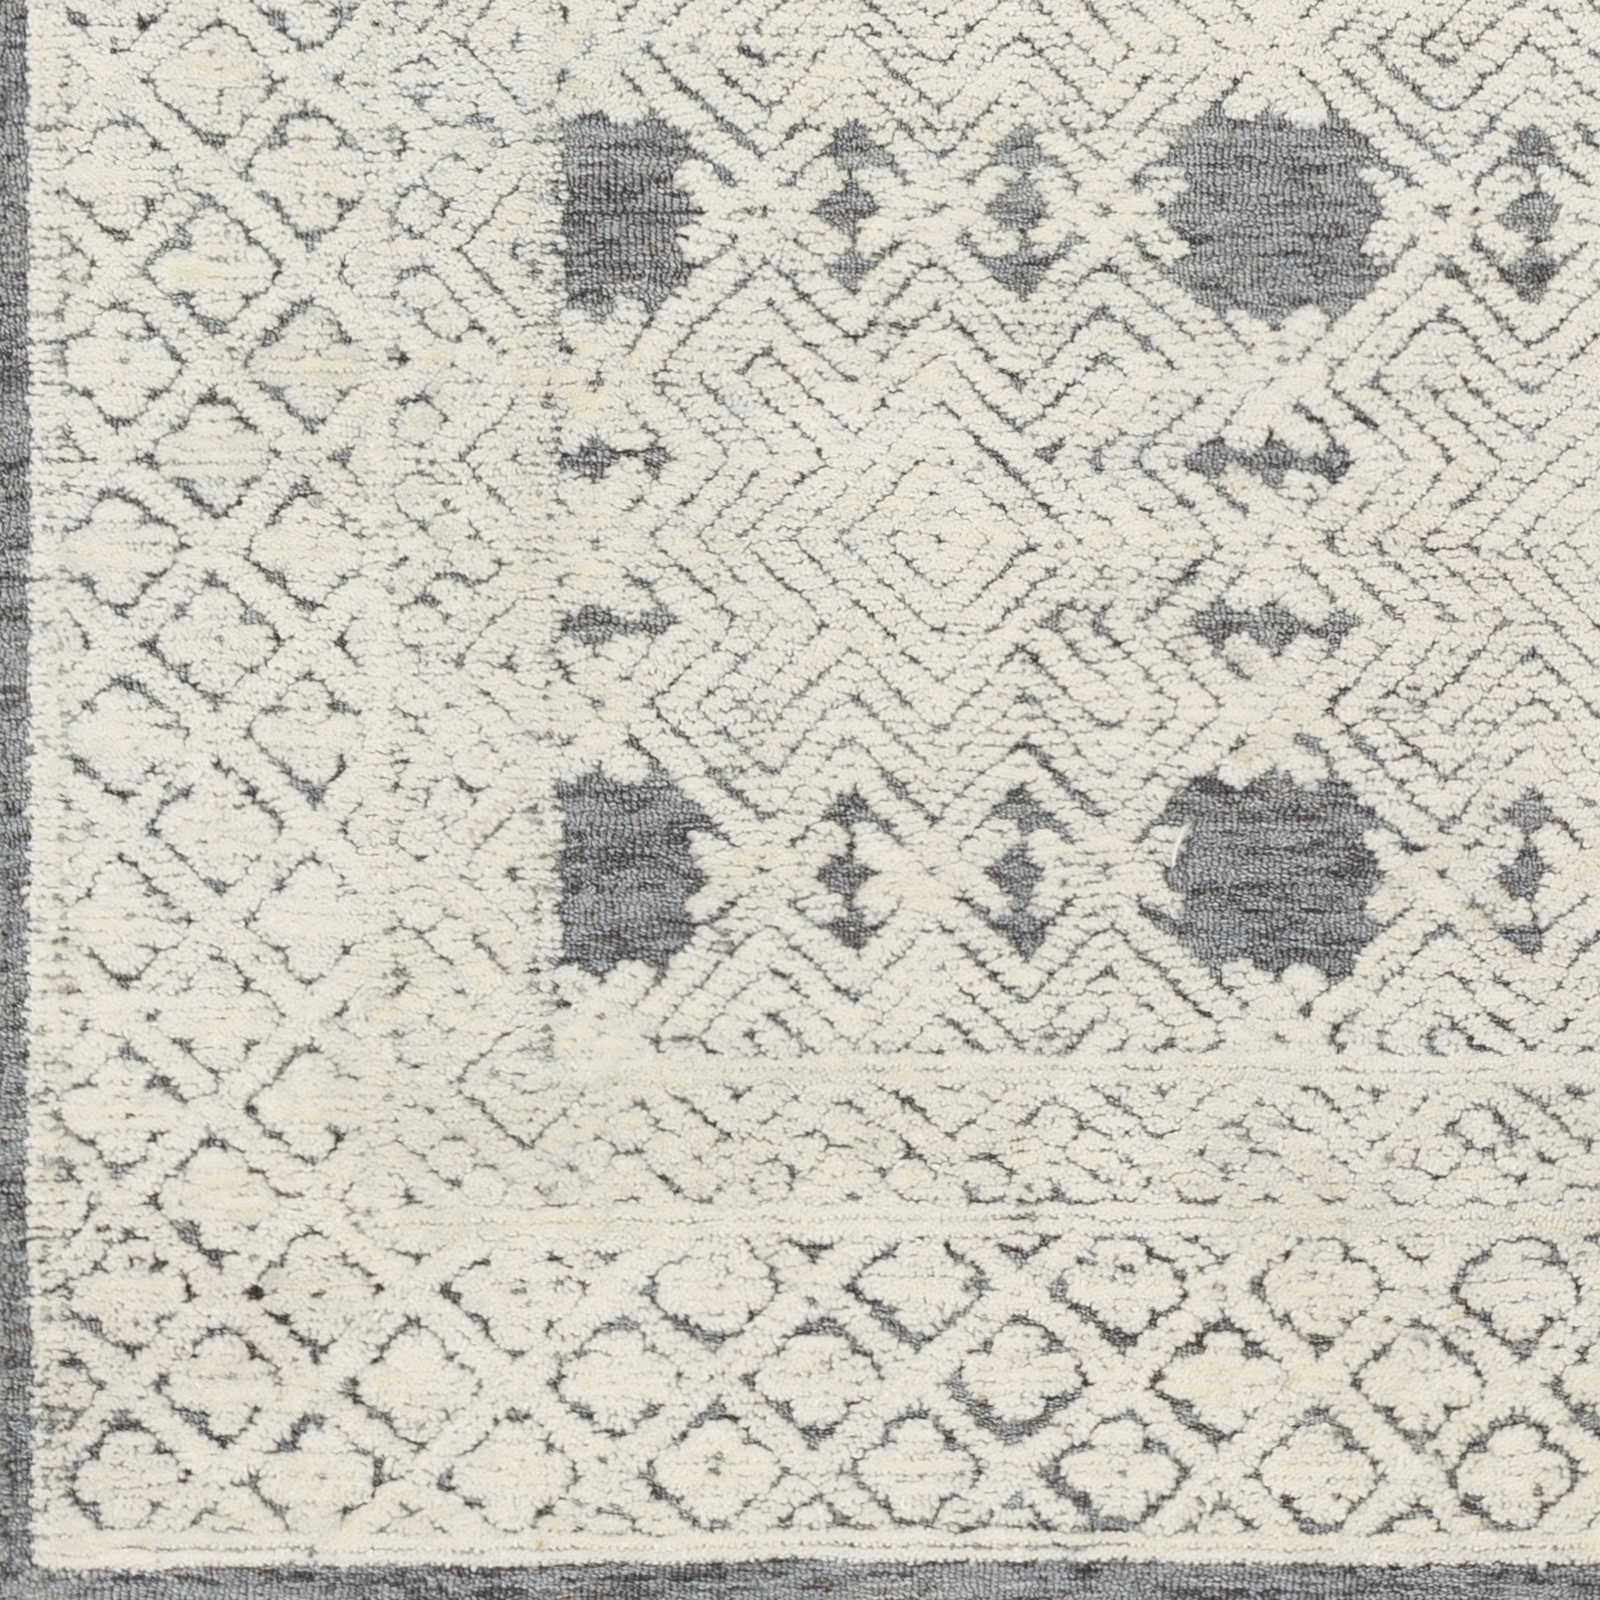 Louvre Rug, 6' x 9' - Image 2